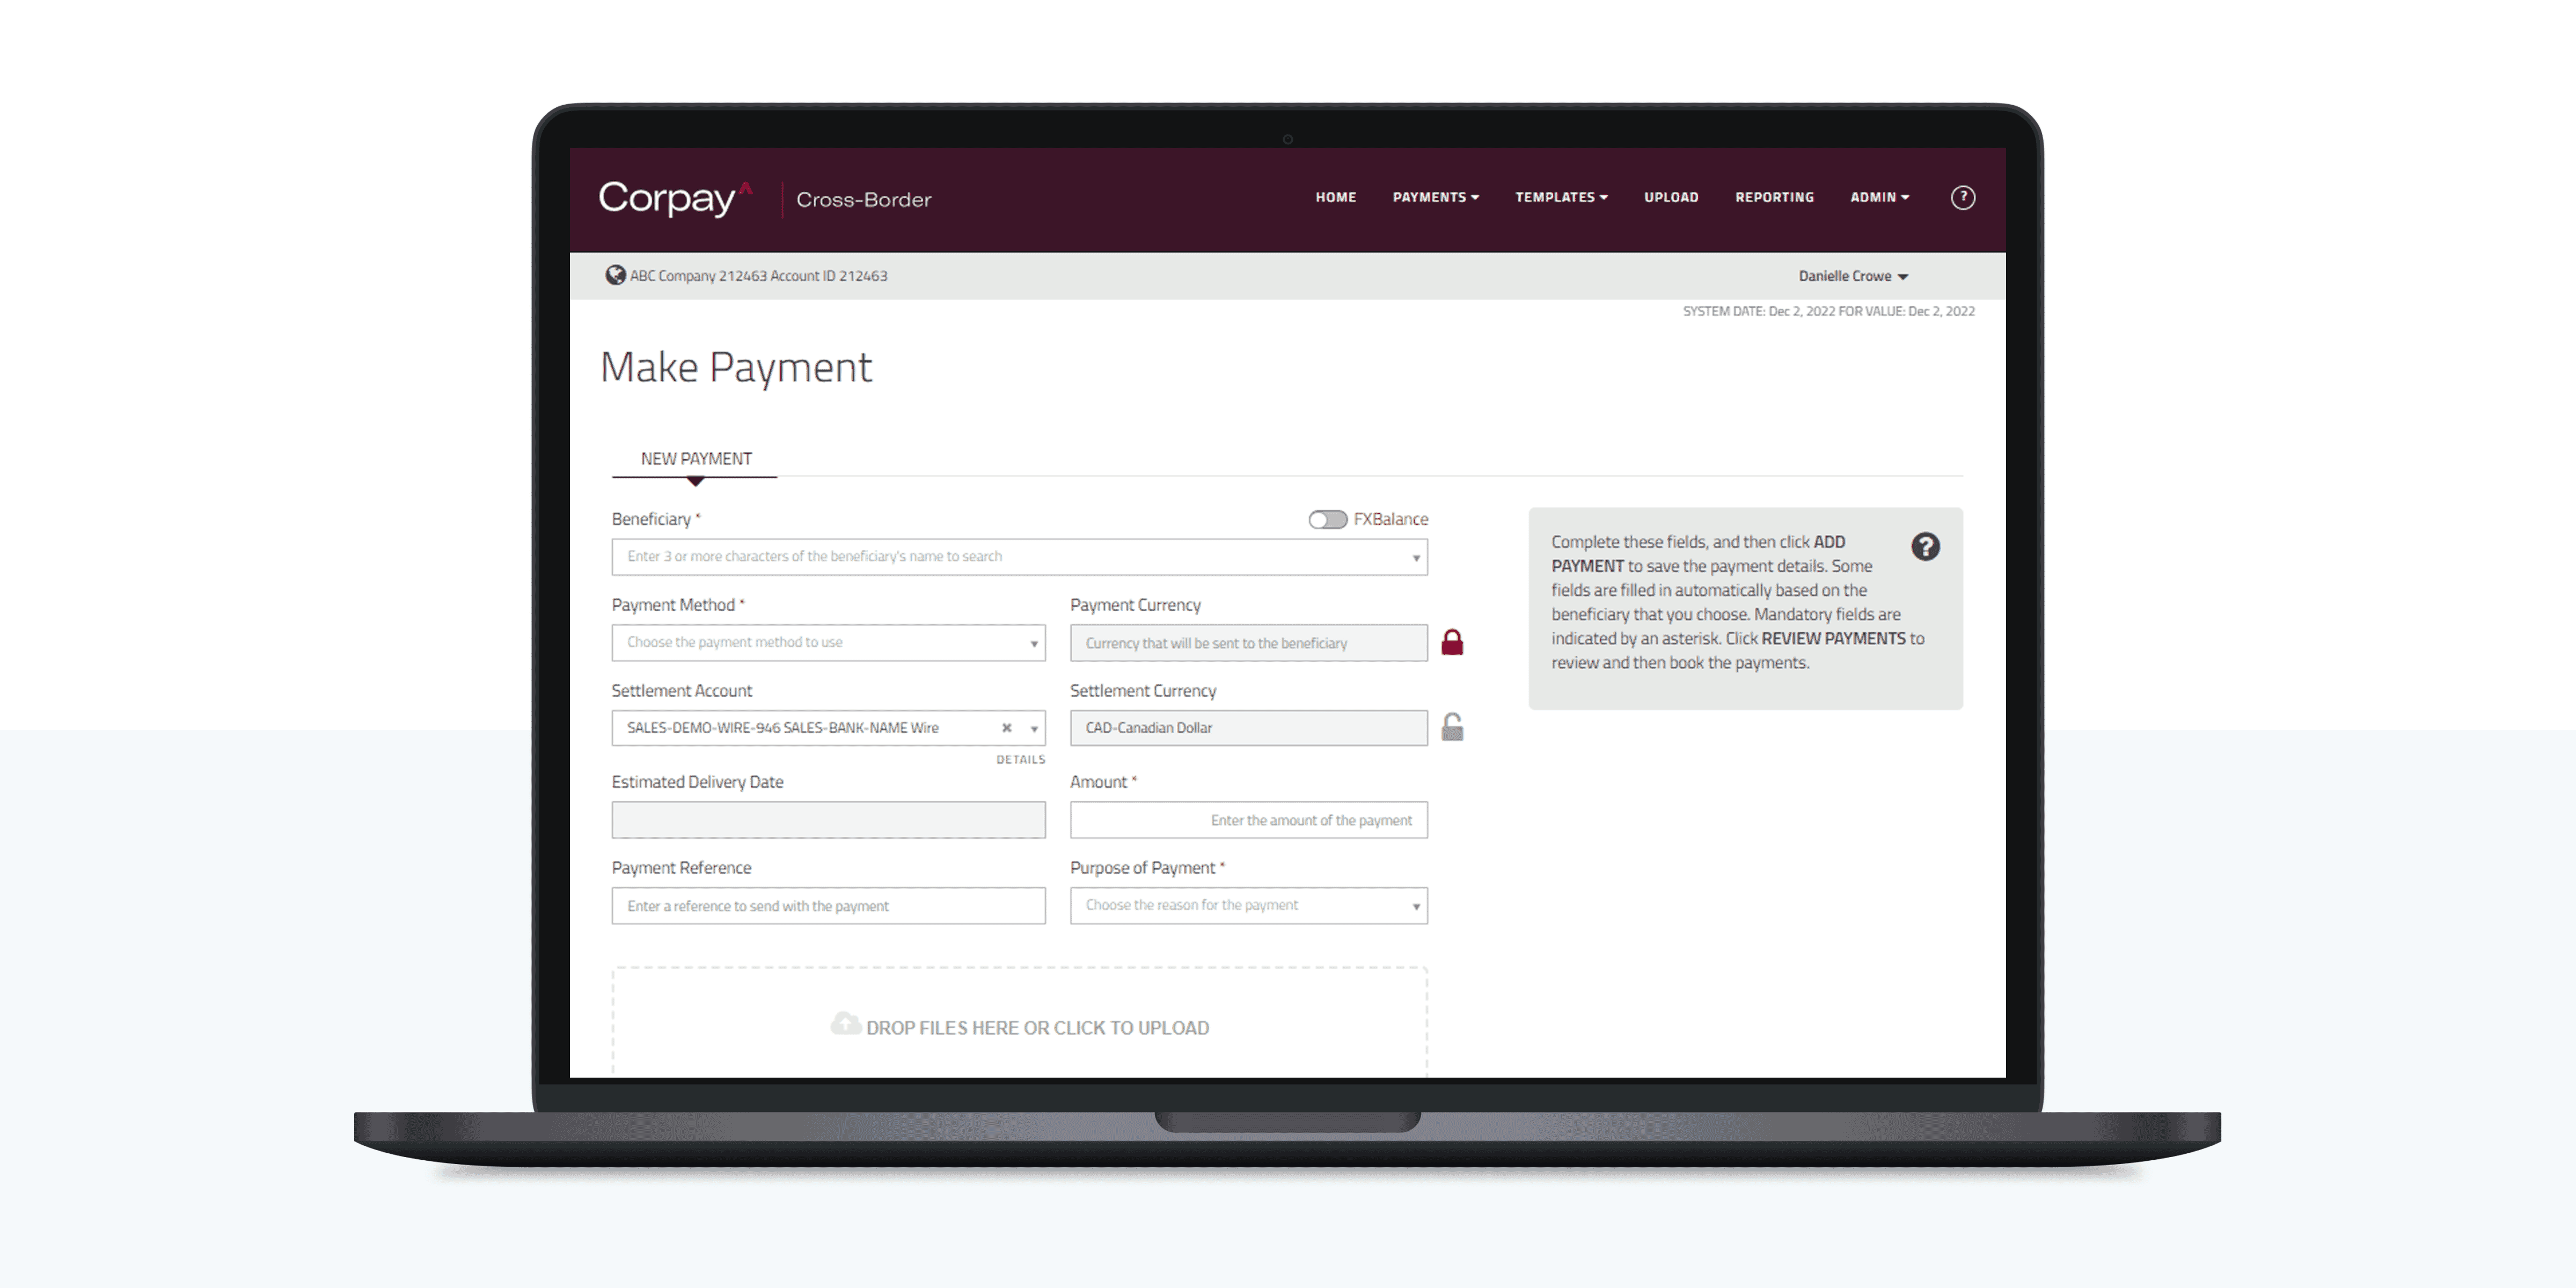 Corpay's Multilingual Payment Platform Powered by MadTranslations